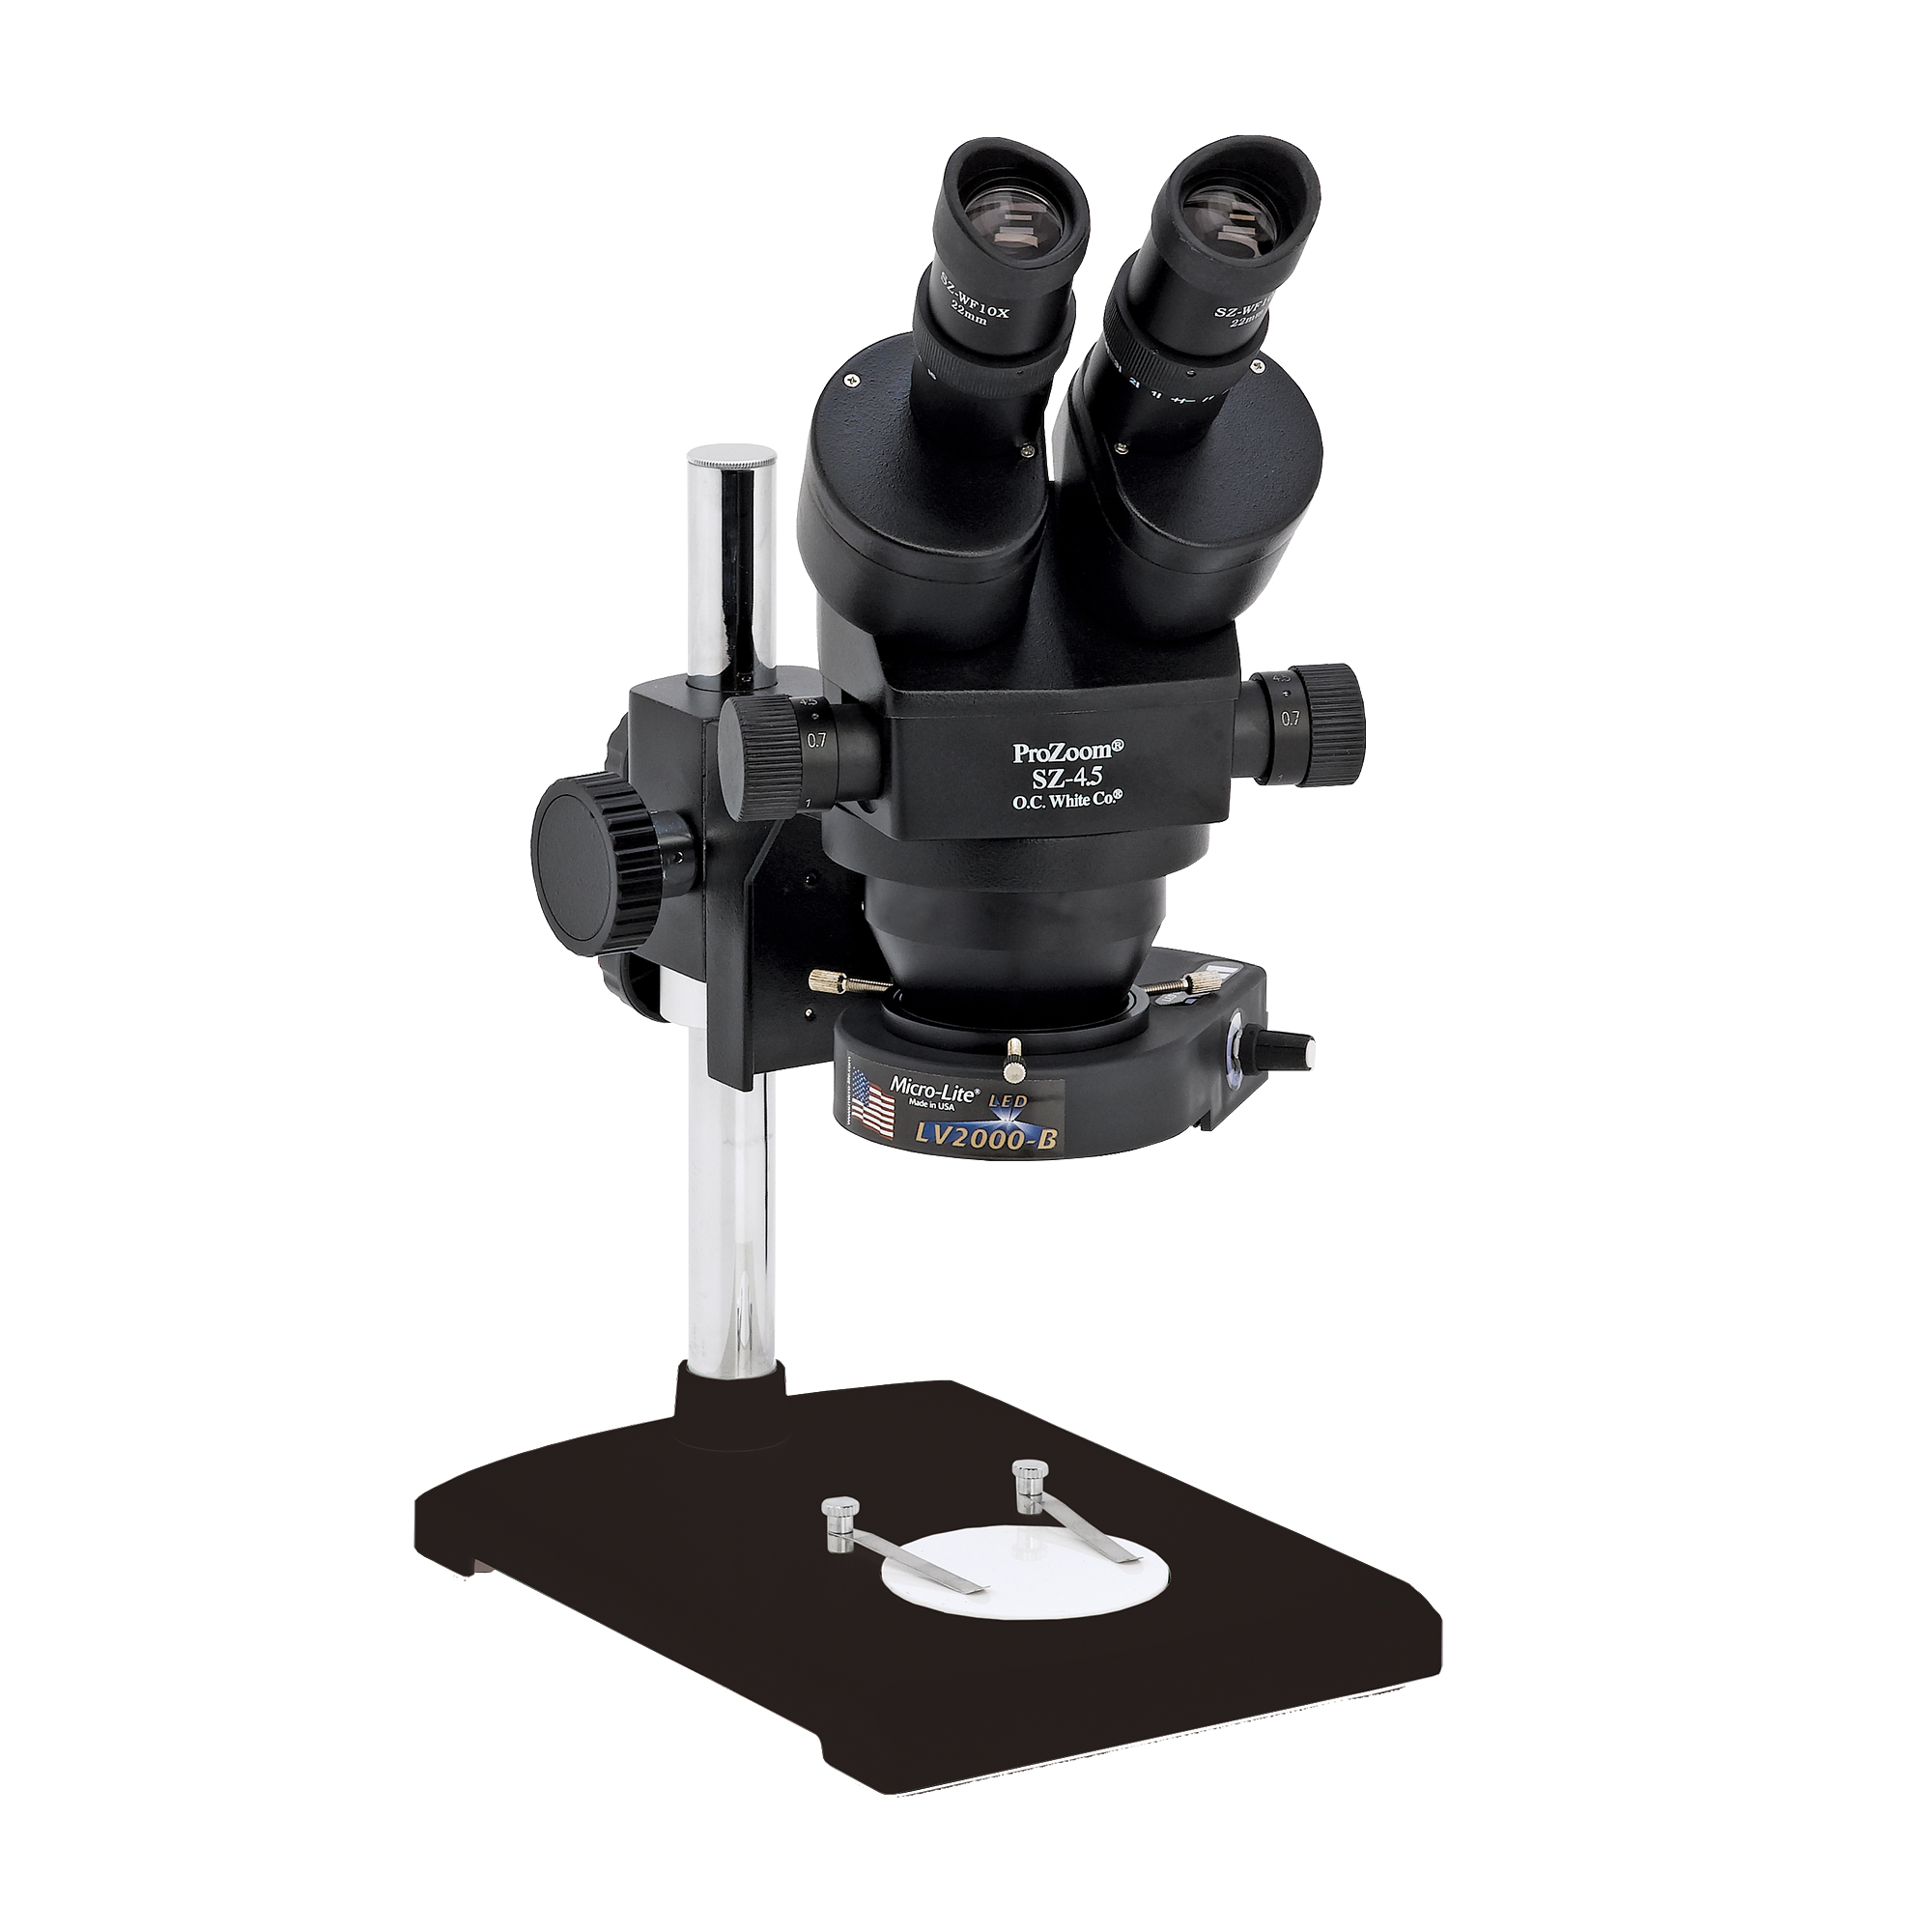 O.C.White Prozoom 4.5 Stereo-Zoom Microscope with Lab Style Base LV2000 B LED Ring Light